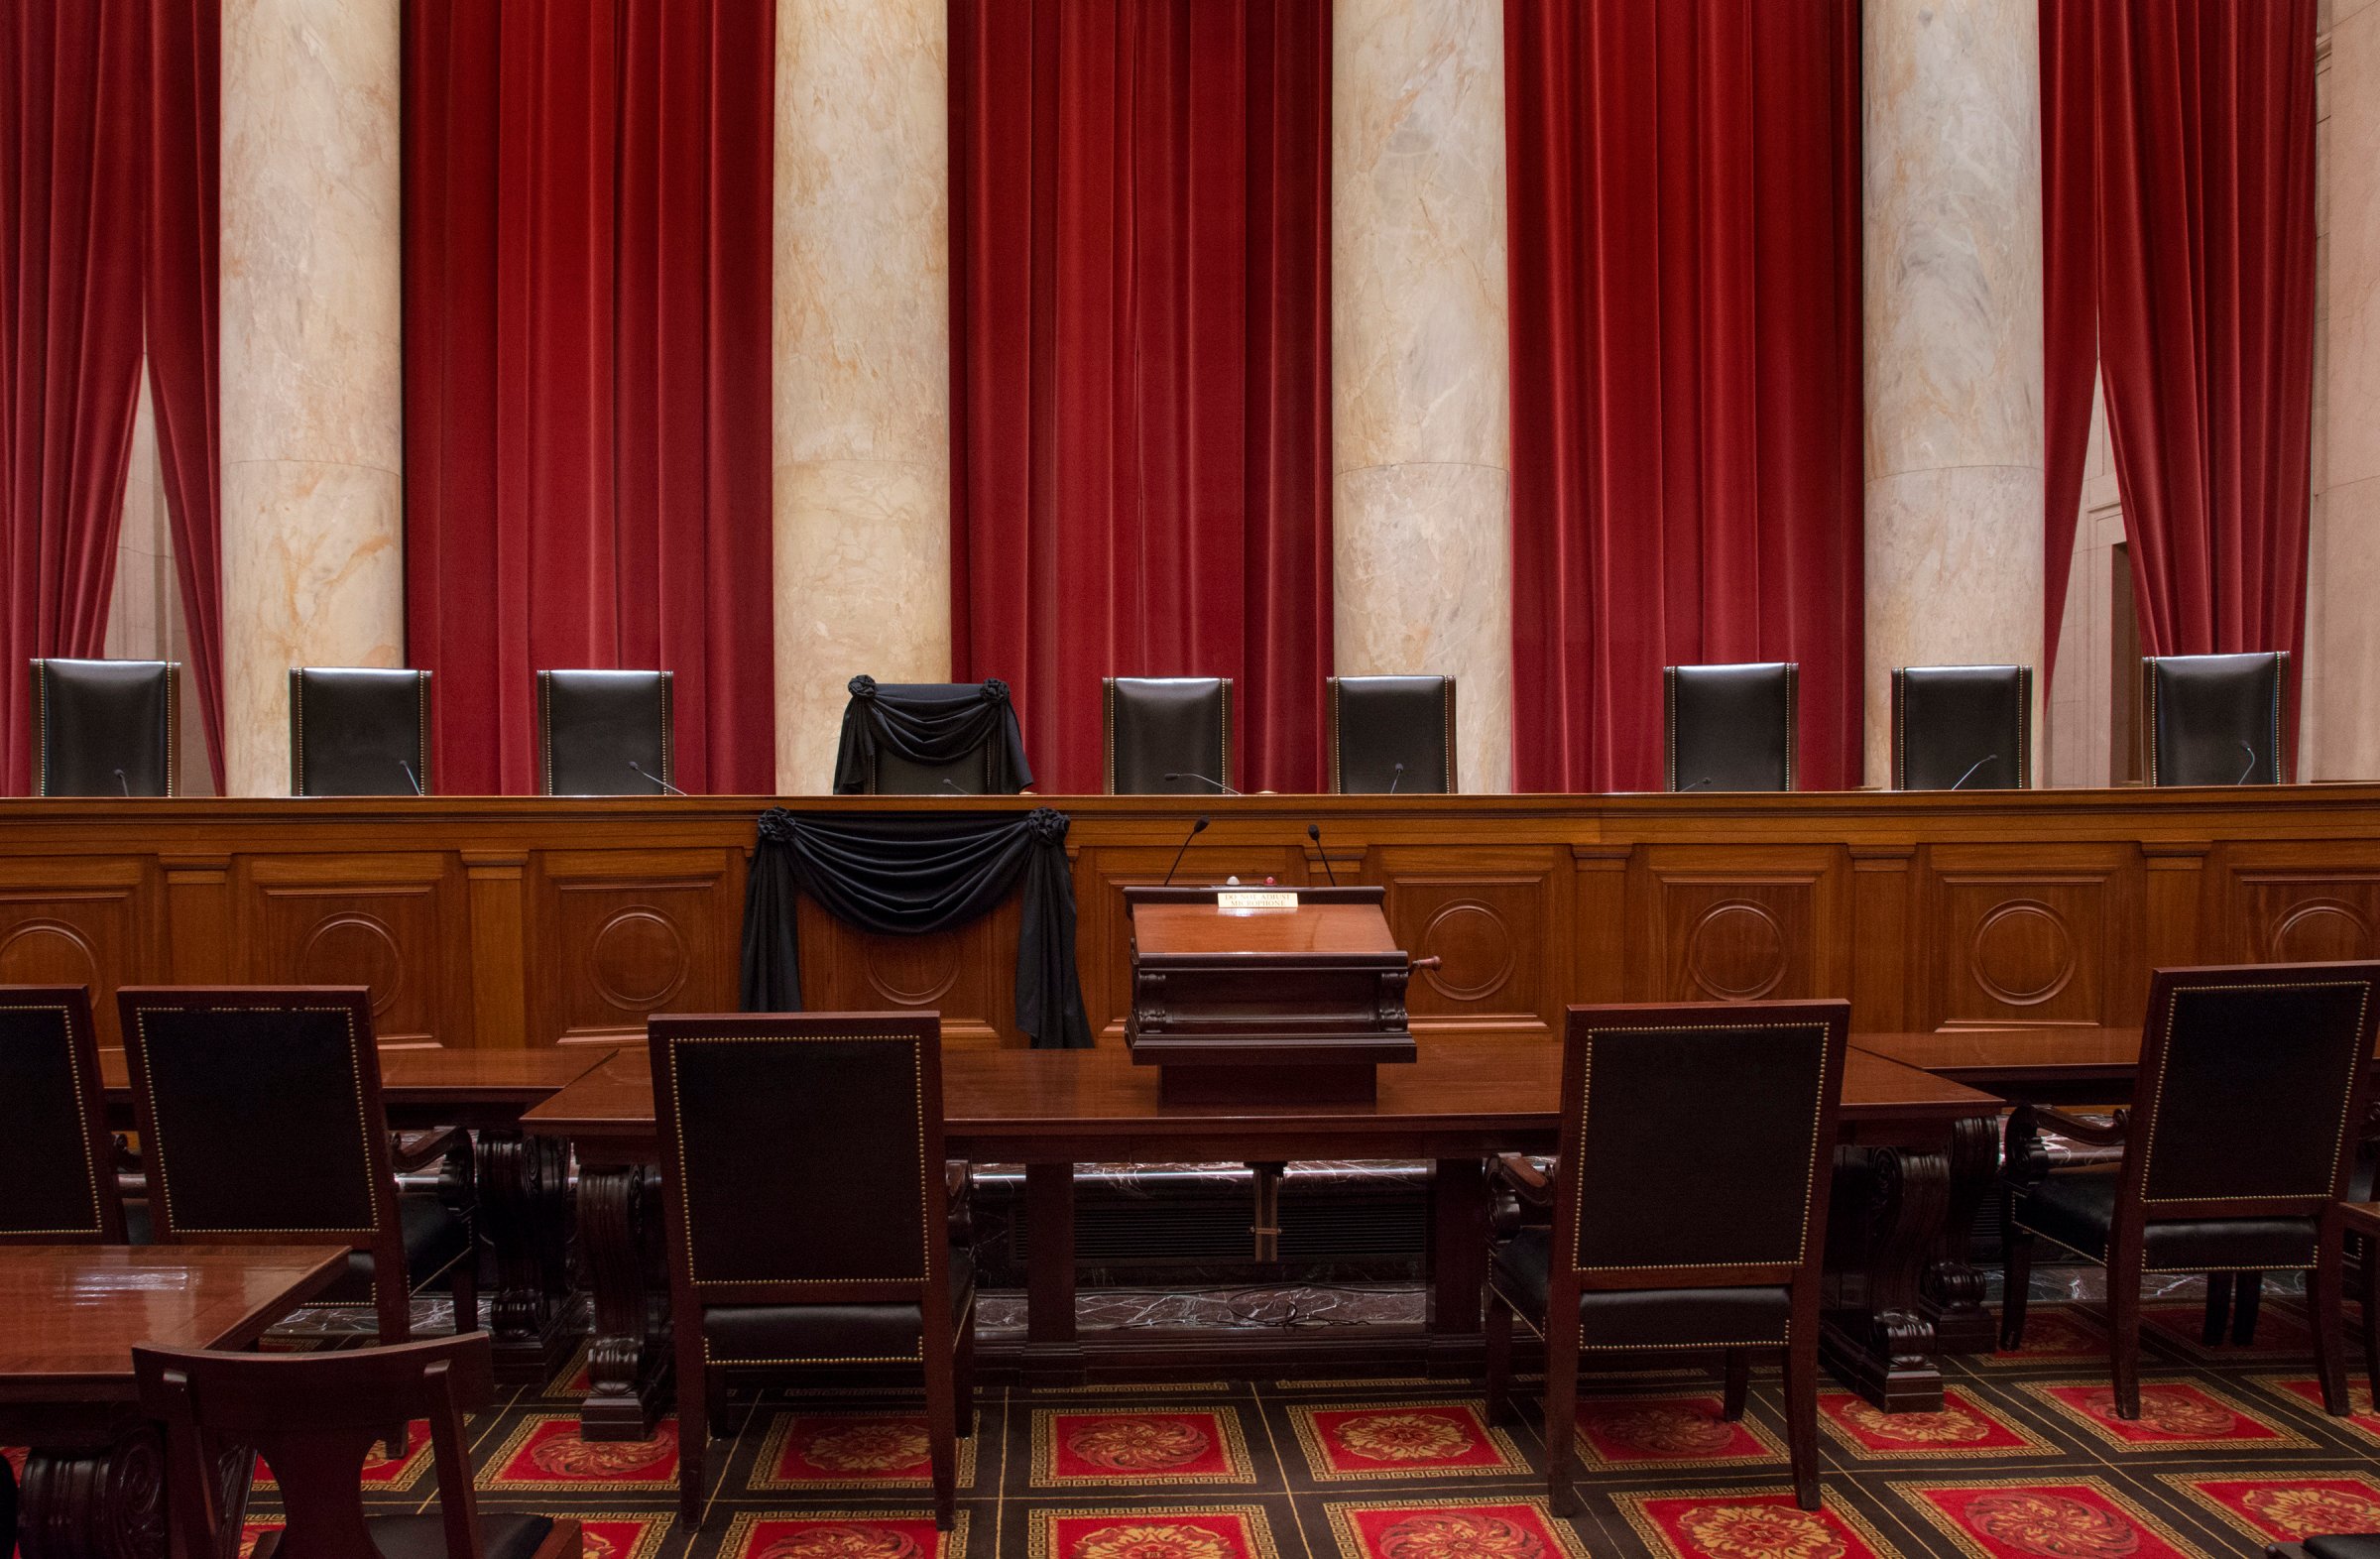 Associate Justice Antonin Scalia’s bench chair and the bench in front of his seat are draped in black in the Courtroom of the Supreme Court following his Feb. 13, 2016 death.